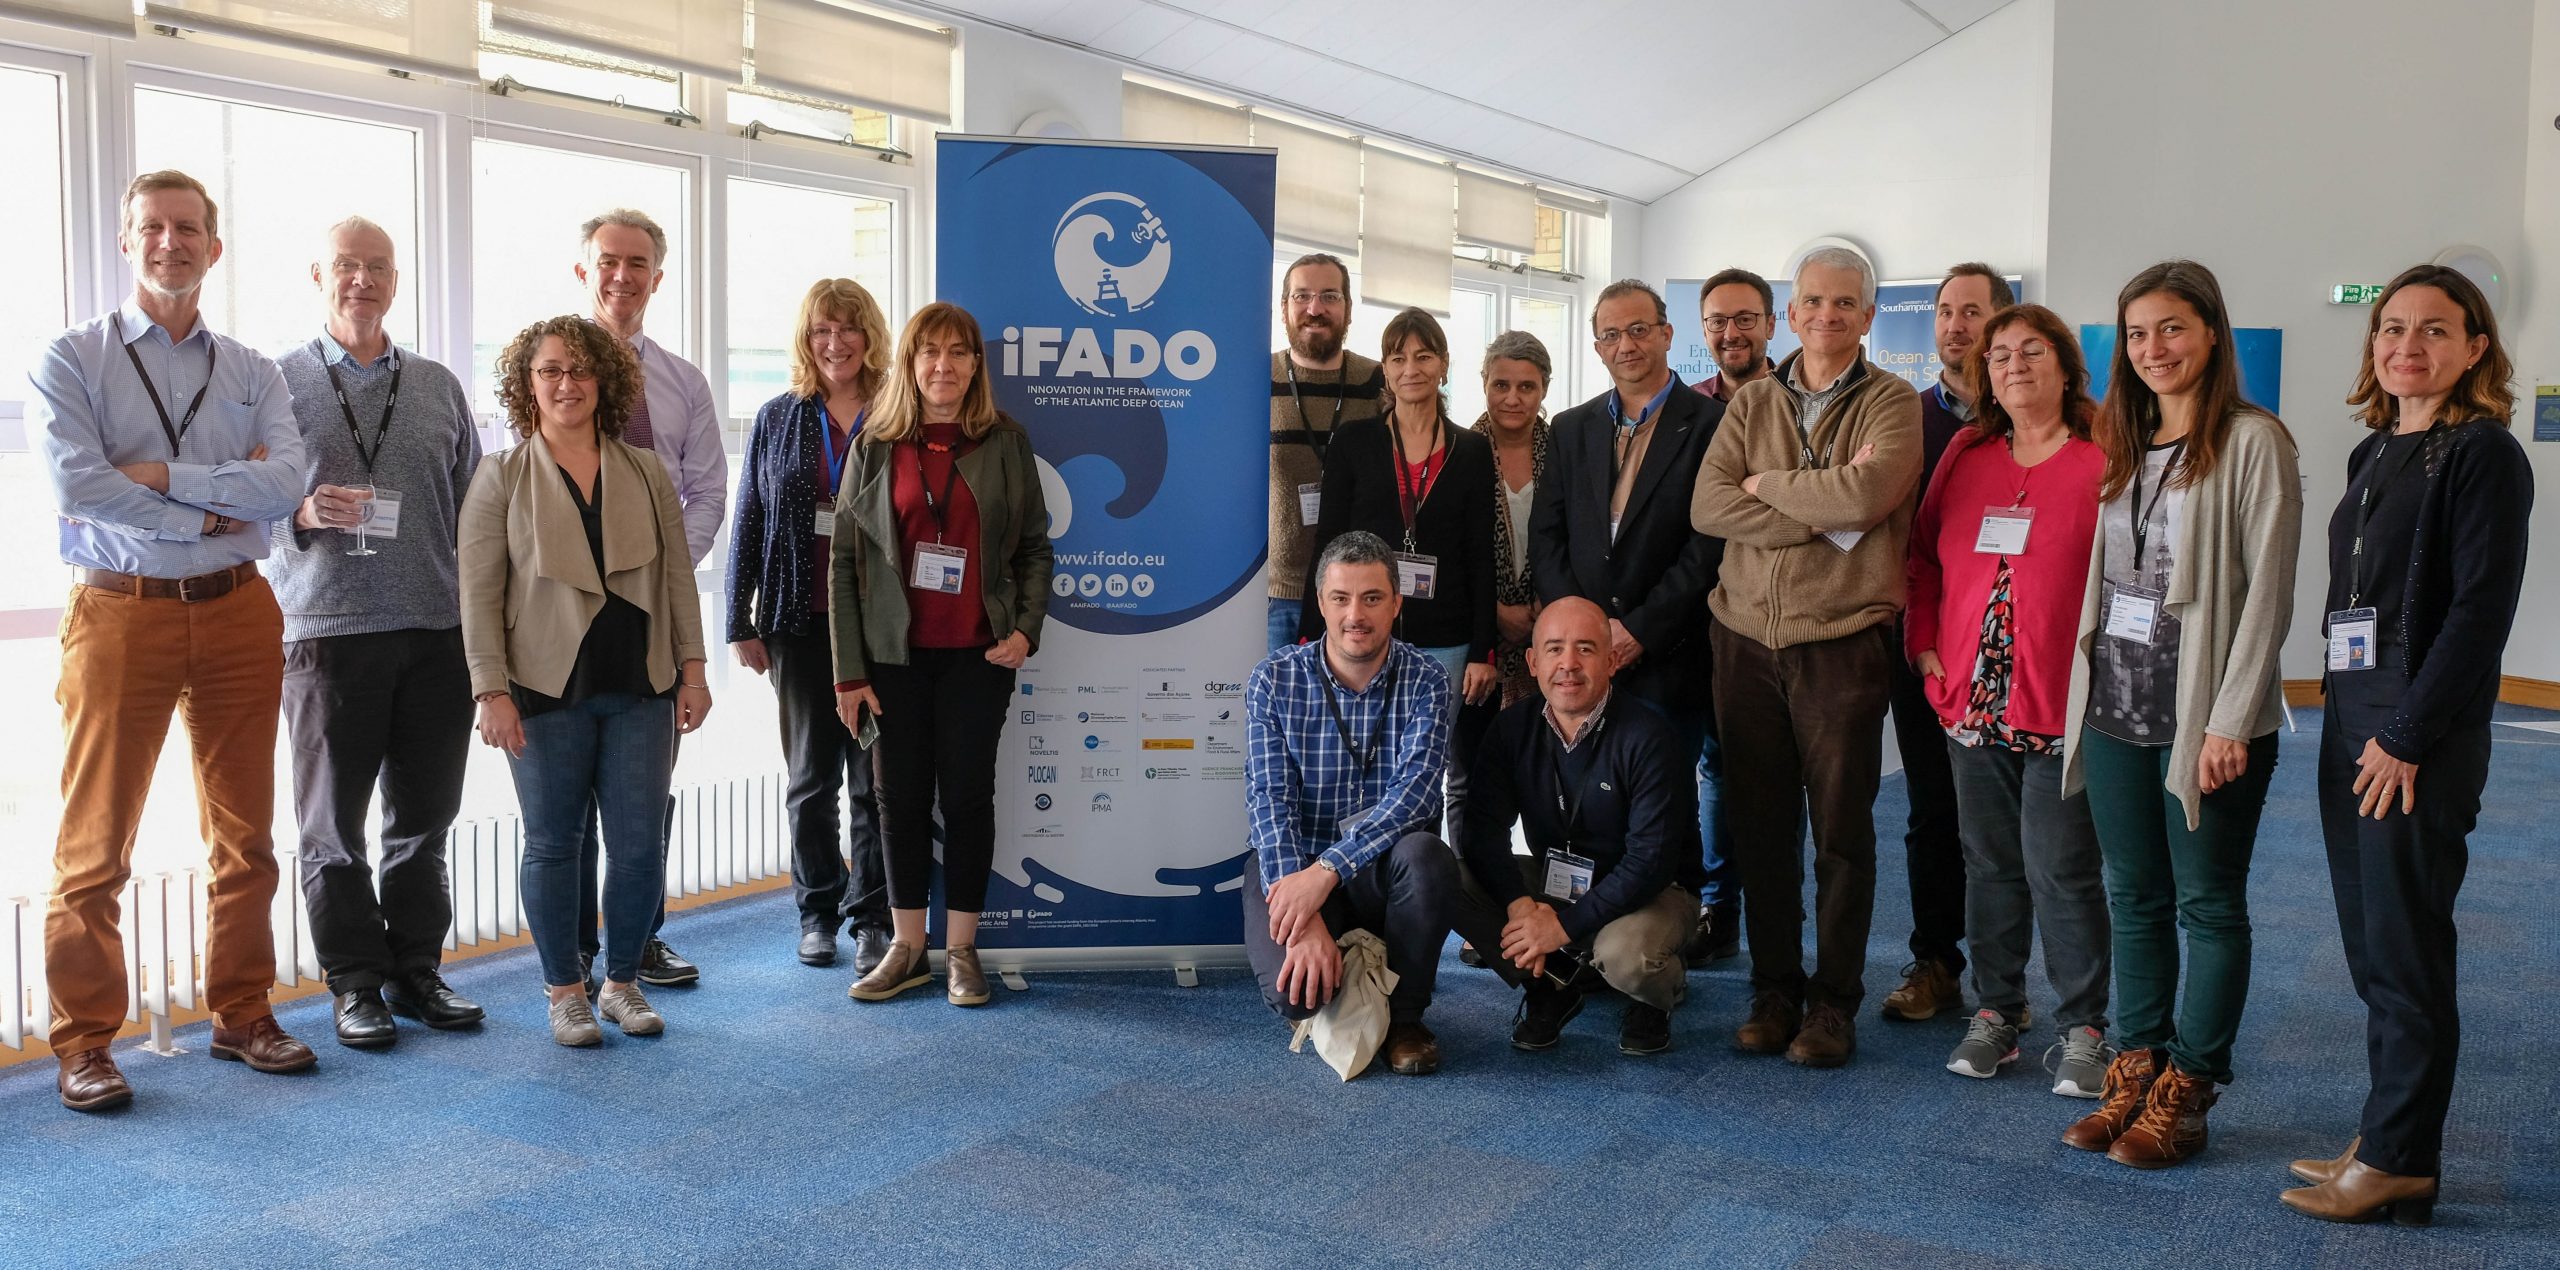 GENERAL ASSEMBLY OF PARTNERS OF THE iFADO PROJECT